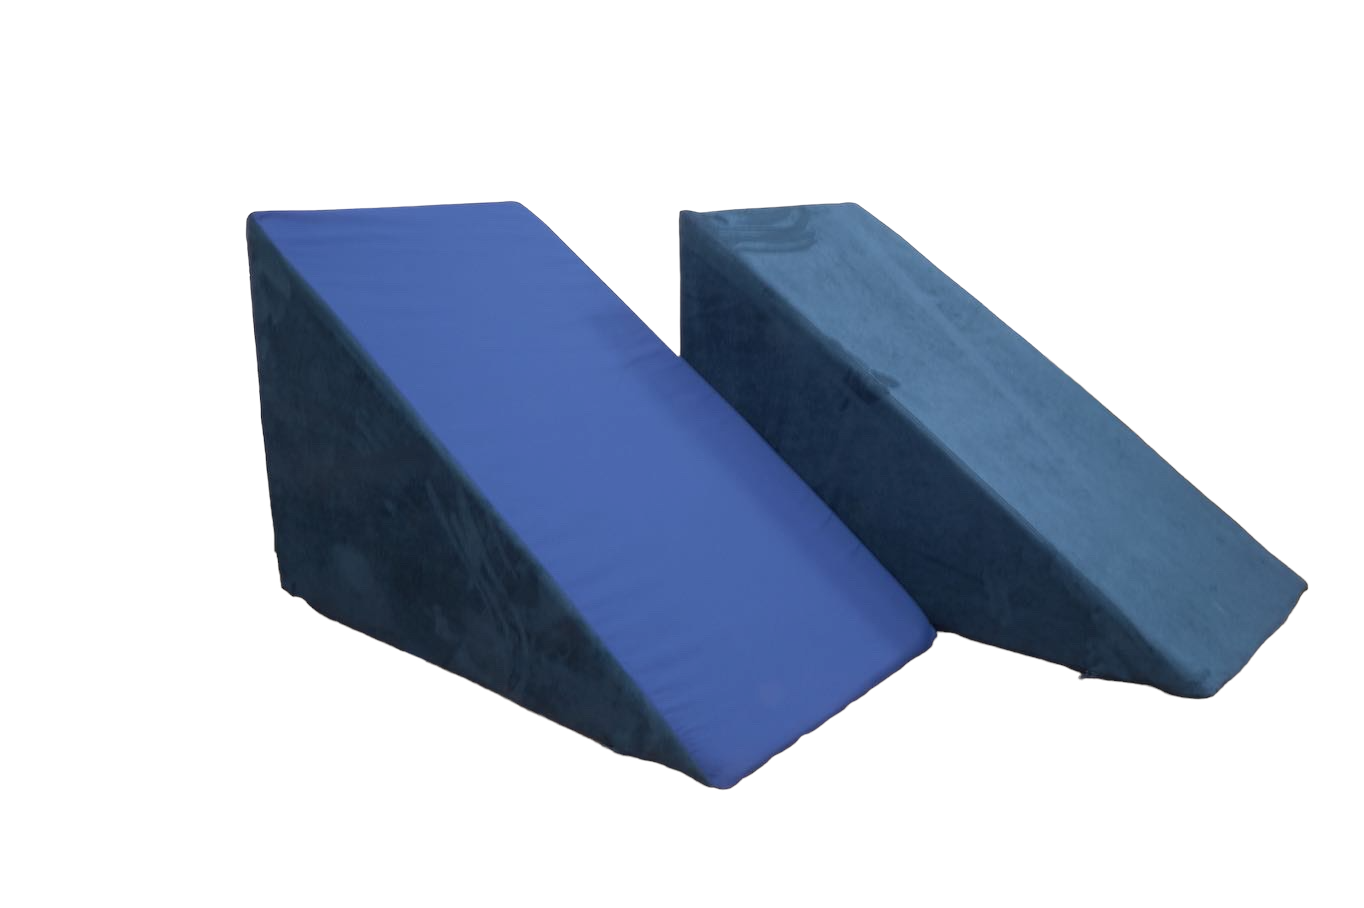 Epic Climb & Slide Wedges (set of 2 with waterproof liners)